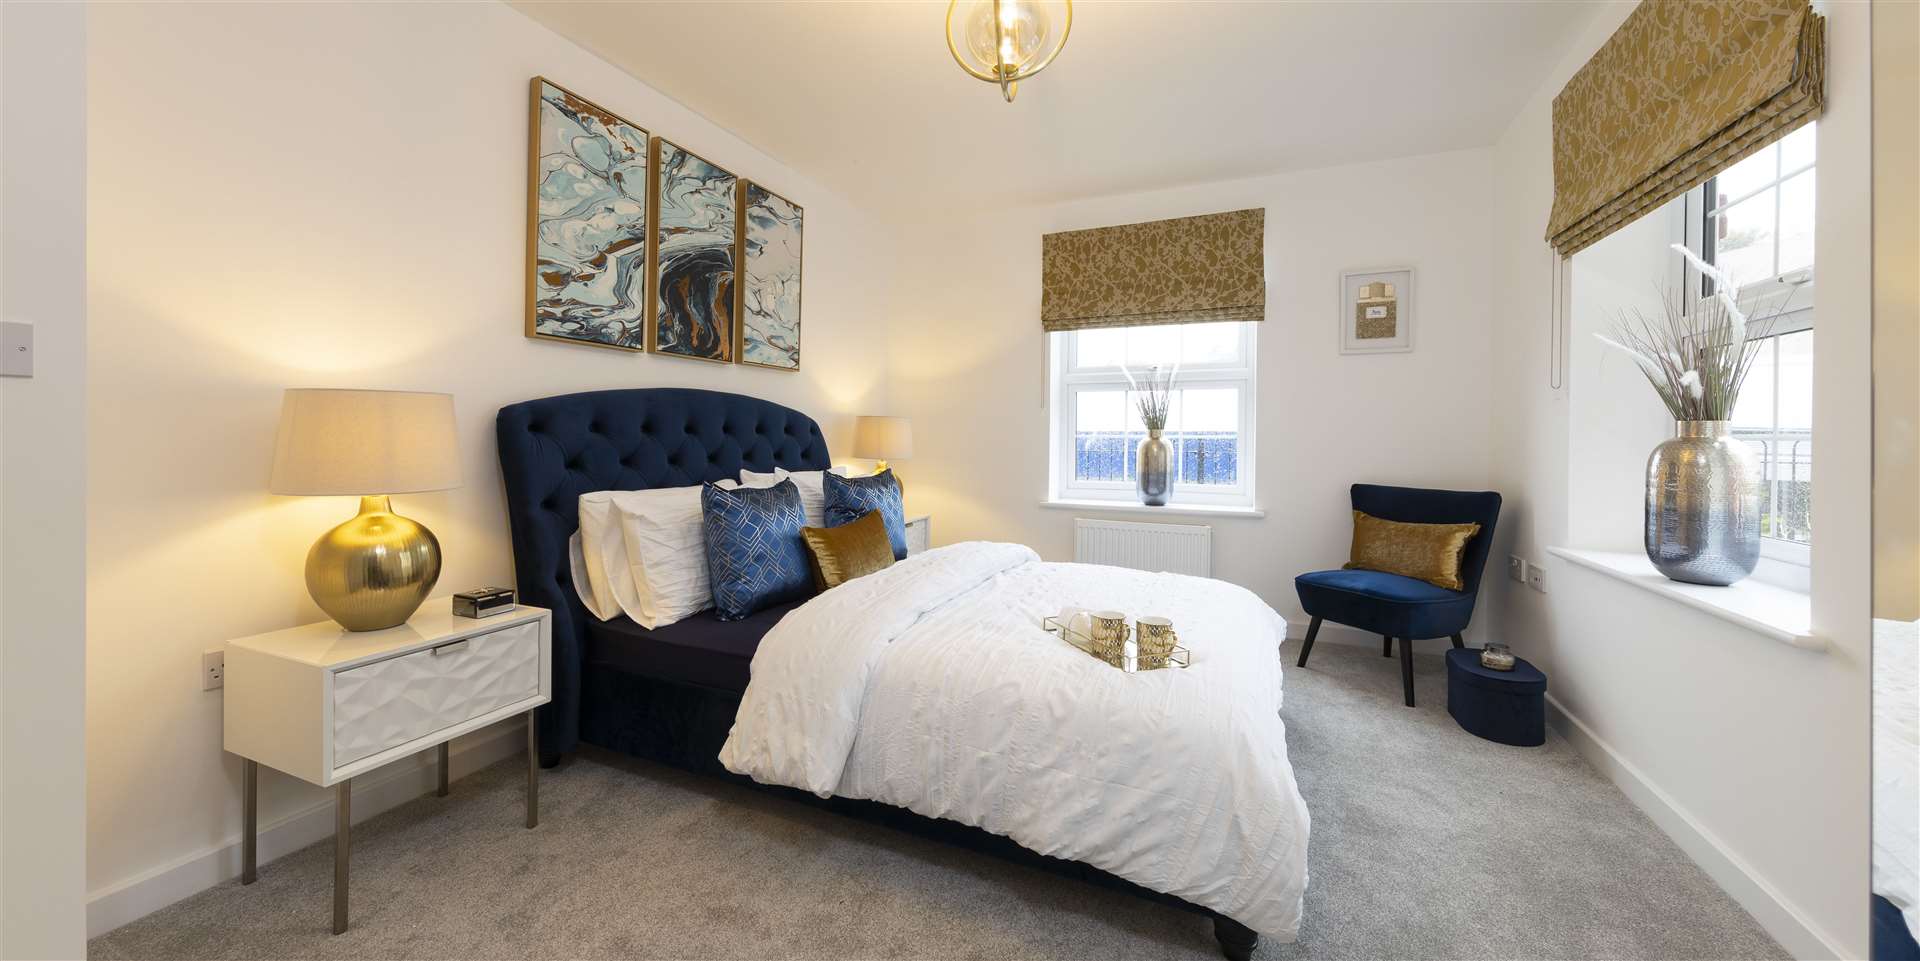 £1,000 worth of Next furniture vouchers are available for buyers of these apartments.